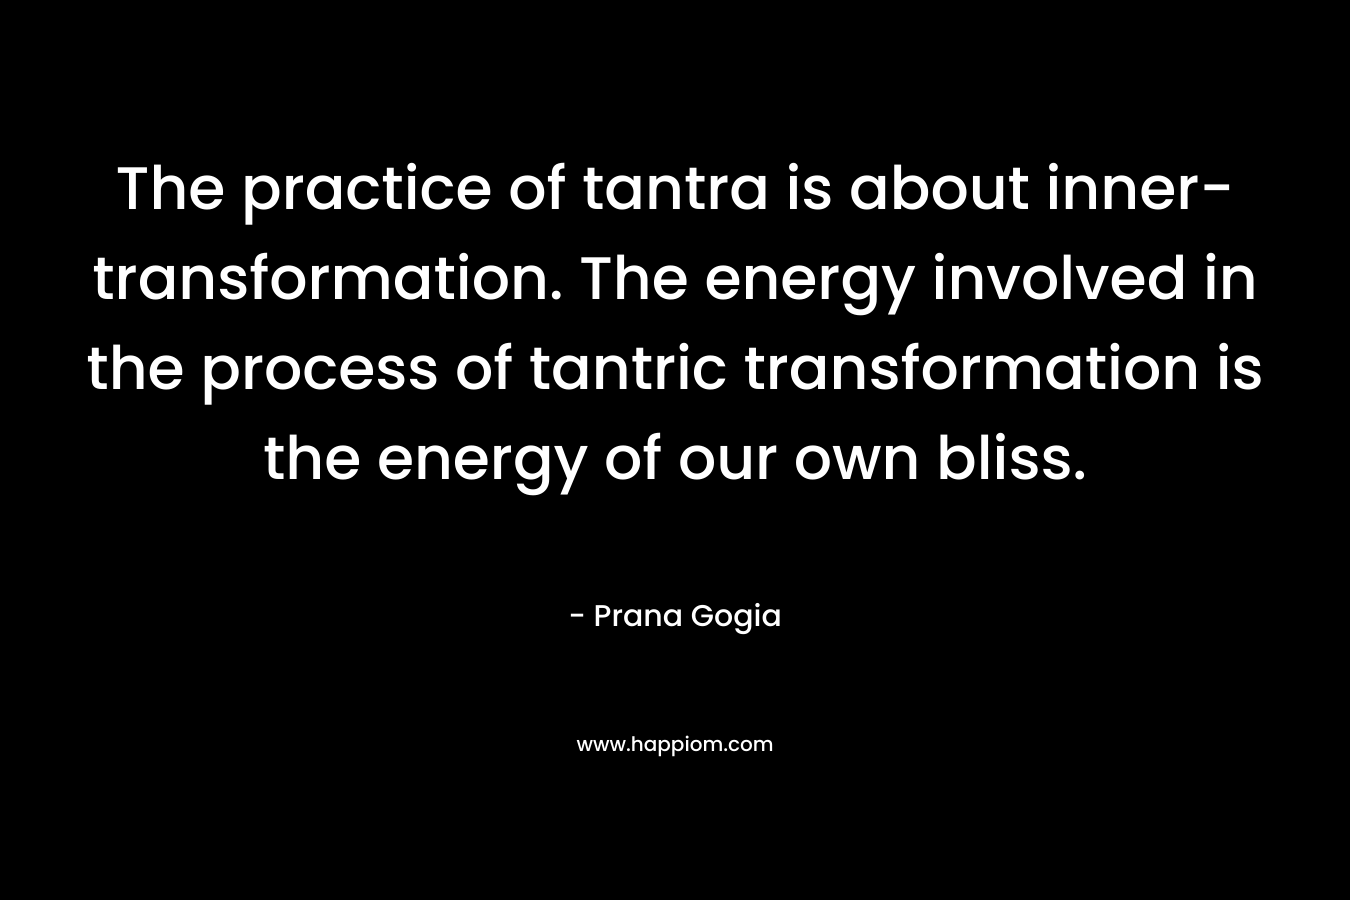 The practice of tantra is about inner-transformation. The energy involved in the process of tantric transformation is the energy of our own bliss. – Prana Gogia